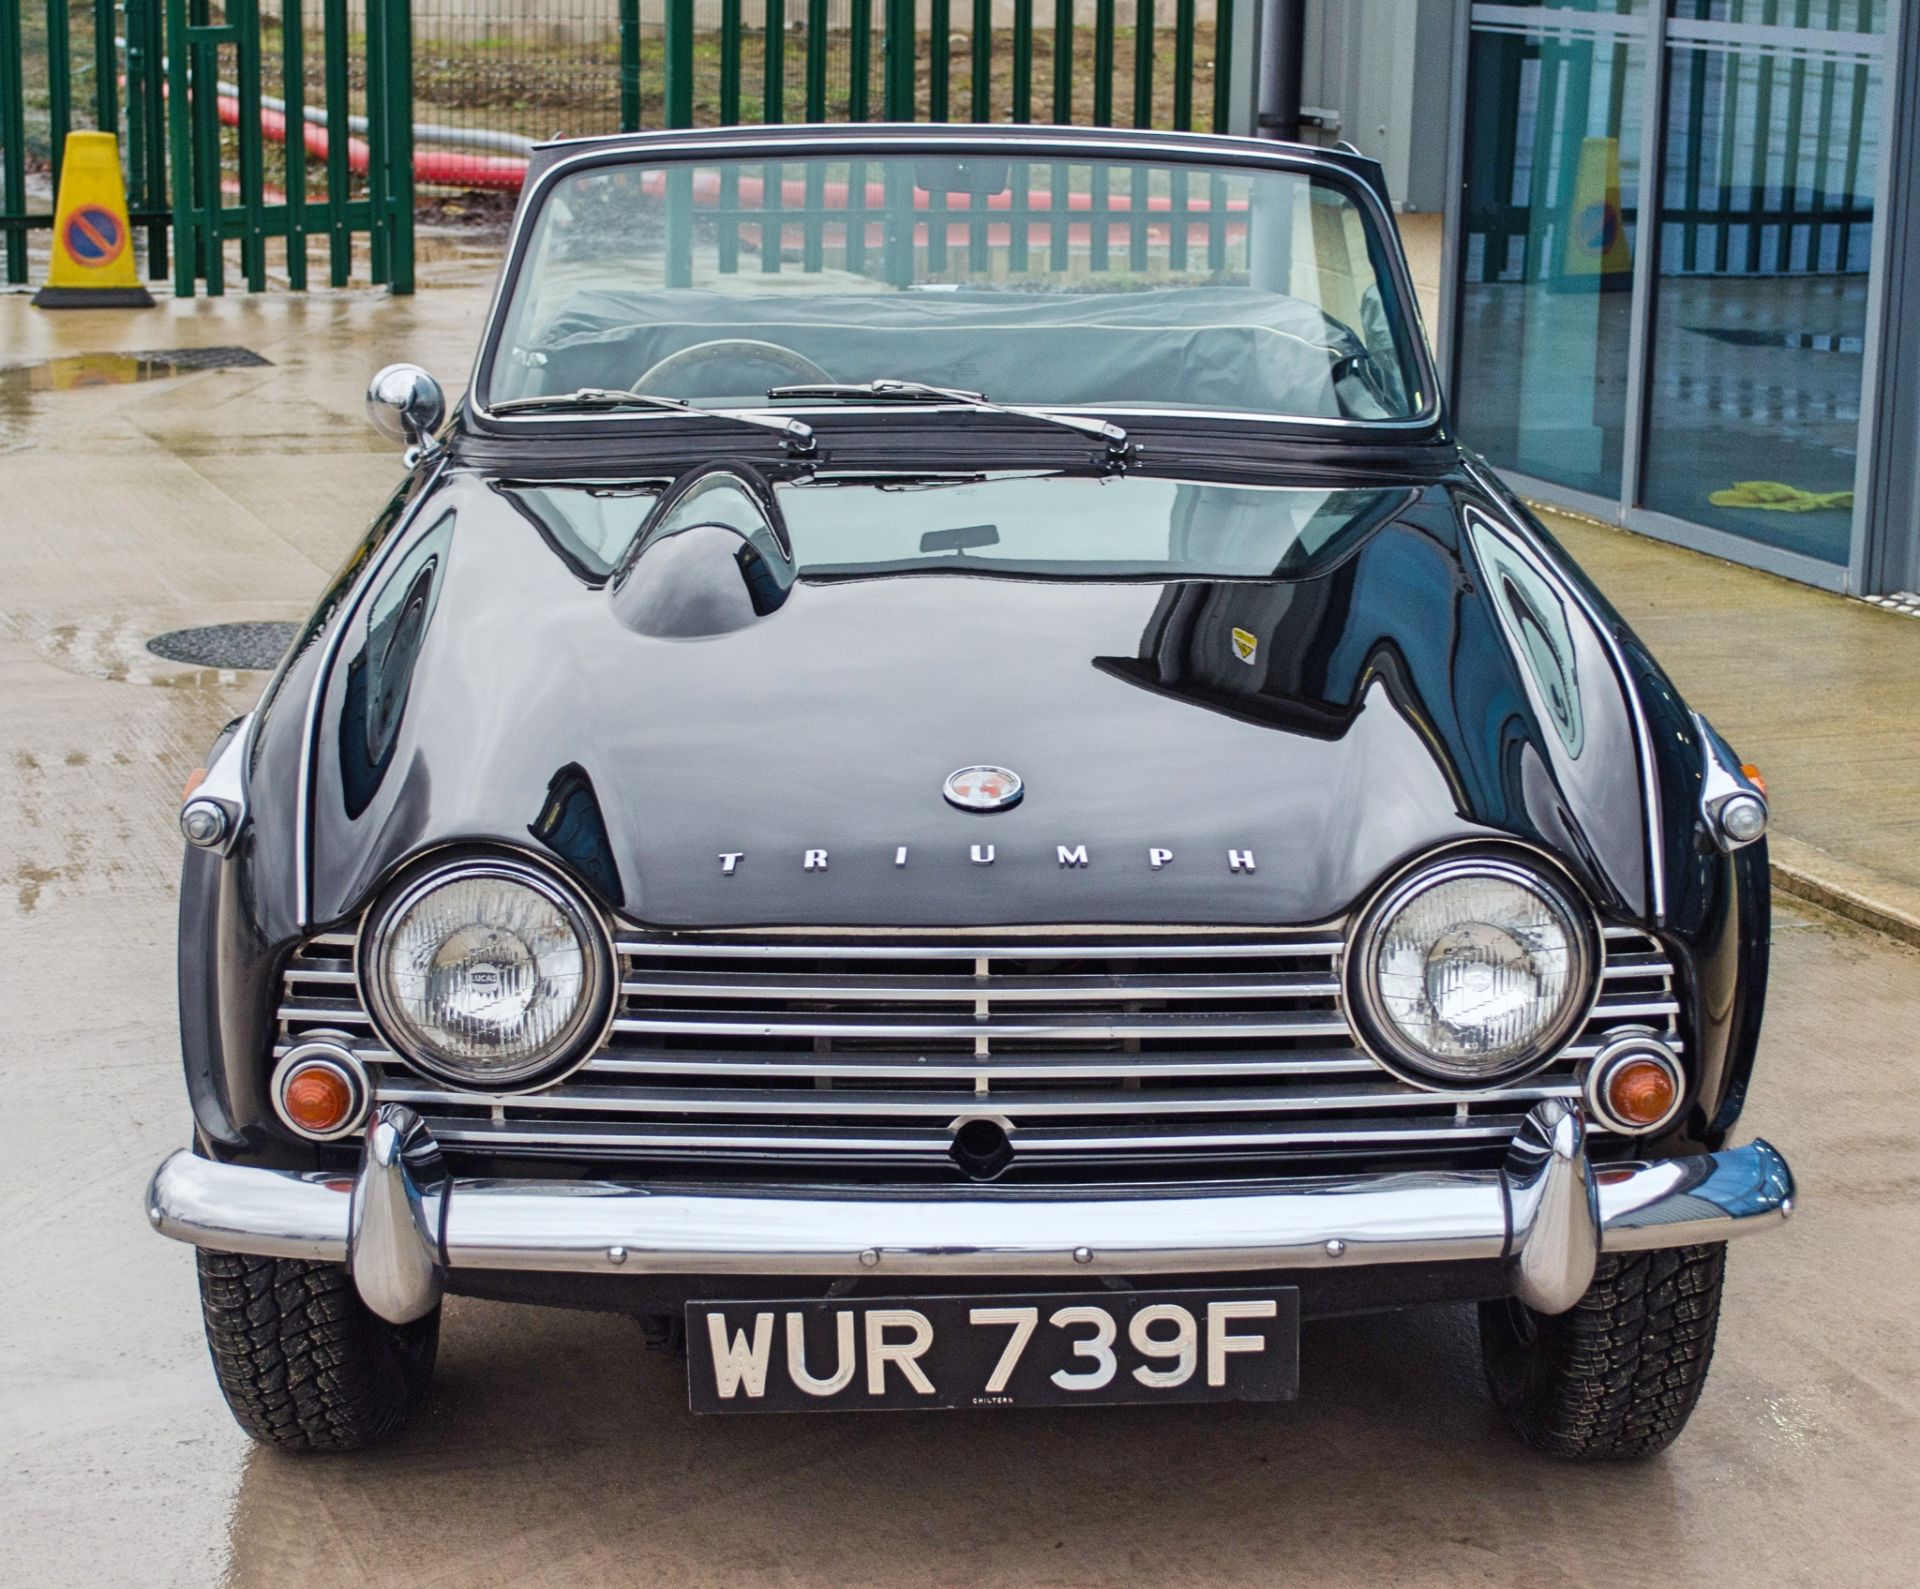 1967 Triumph TR4A IRS 2135cc convertible - Image 10 of 56